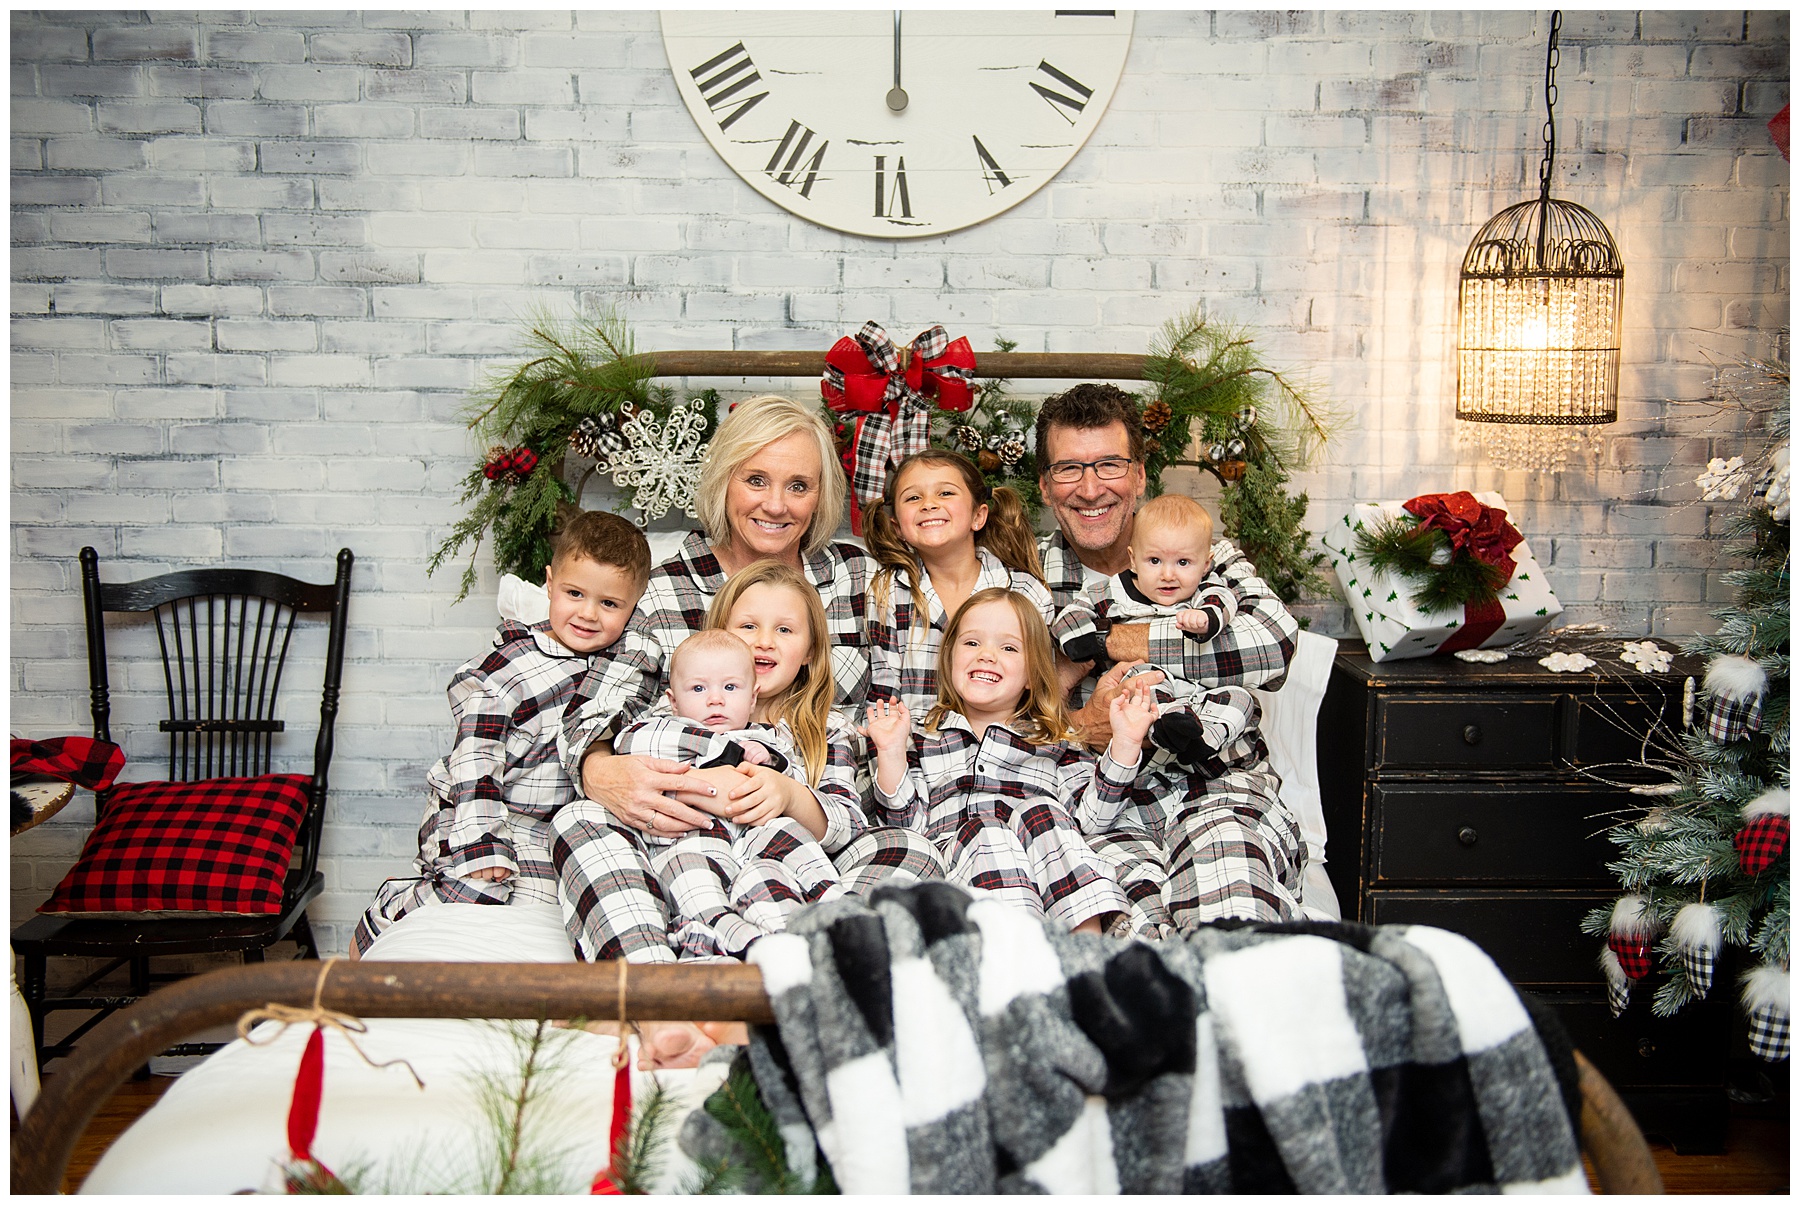 Chris Stephens, wife and grandchildren posing during Christmas session in Knoxville TN